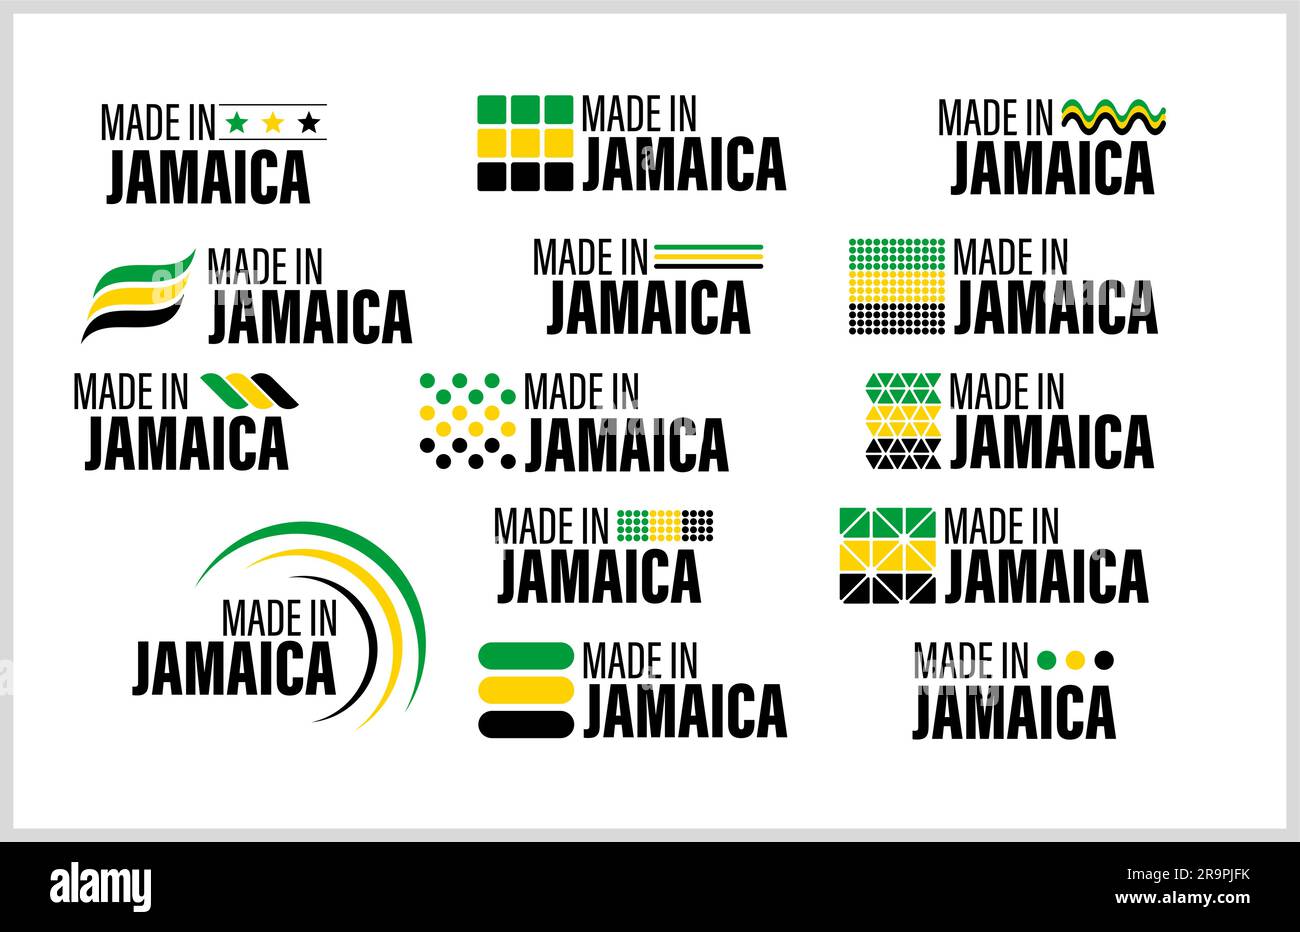 Made in Jamaica graphic and label set. Element of impact for the use you want to make of it. Stock Vector